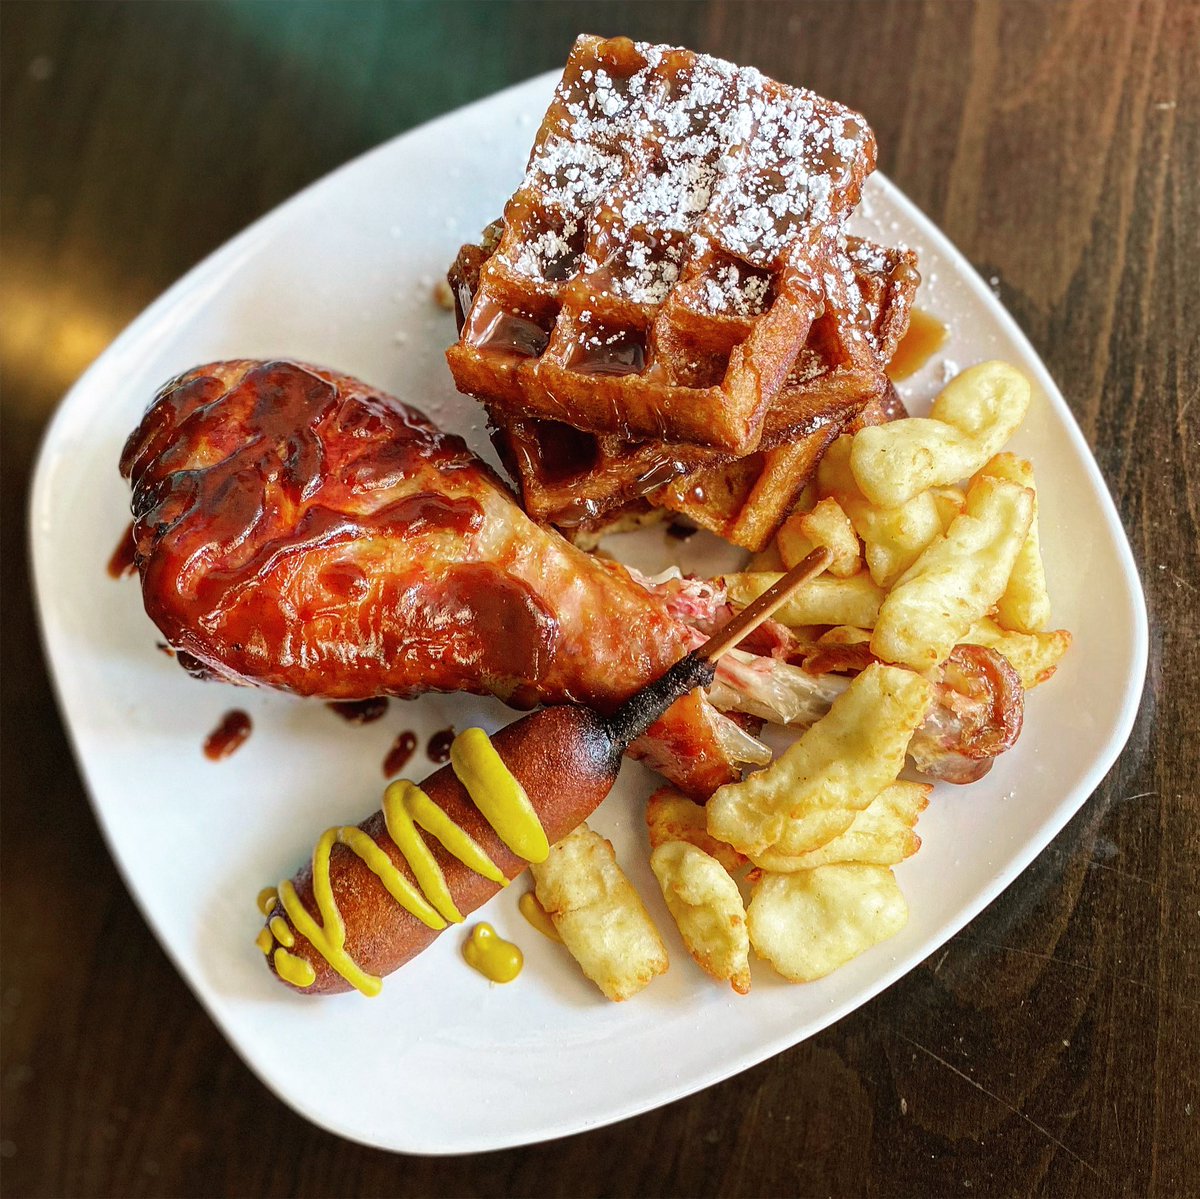 This week the M.C. Waffle is bringing the State Fair to you! It features funnel cake waffles topped with caramel and powdered sugar, paired with cheese curds, a corn dog and a bbq turkey leg!
#eggsandjam #waffles #brunch #breakfast #weeklyfeature #iowastatefair #ISFFindYourFun